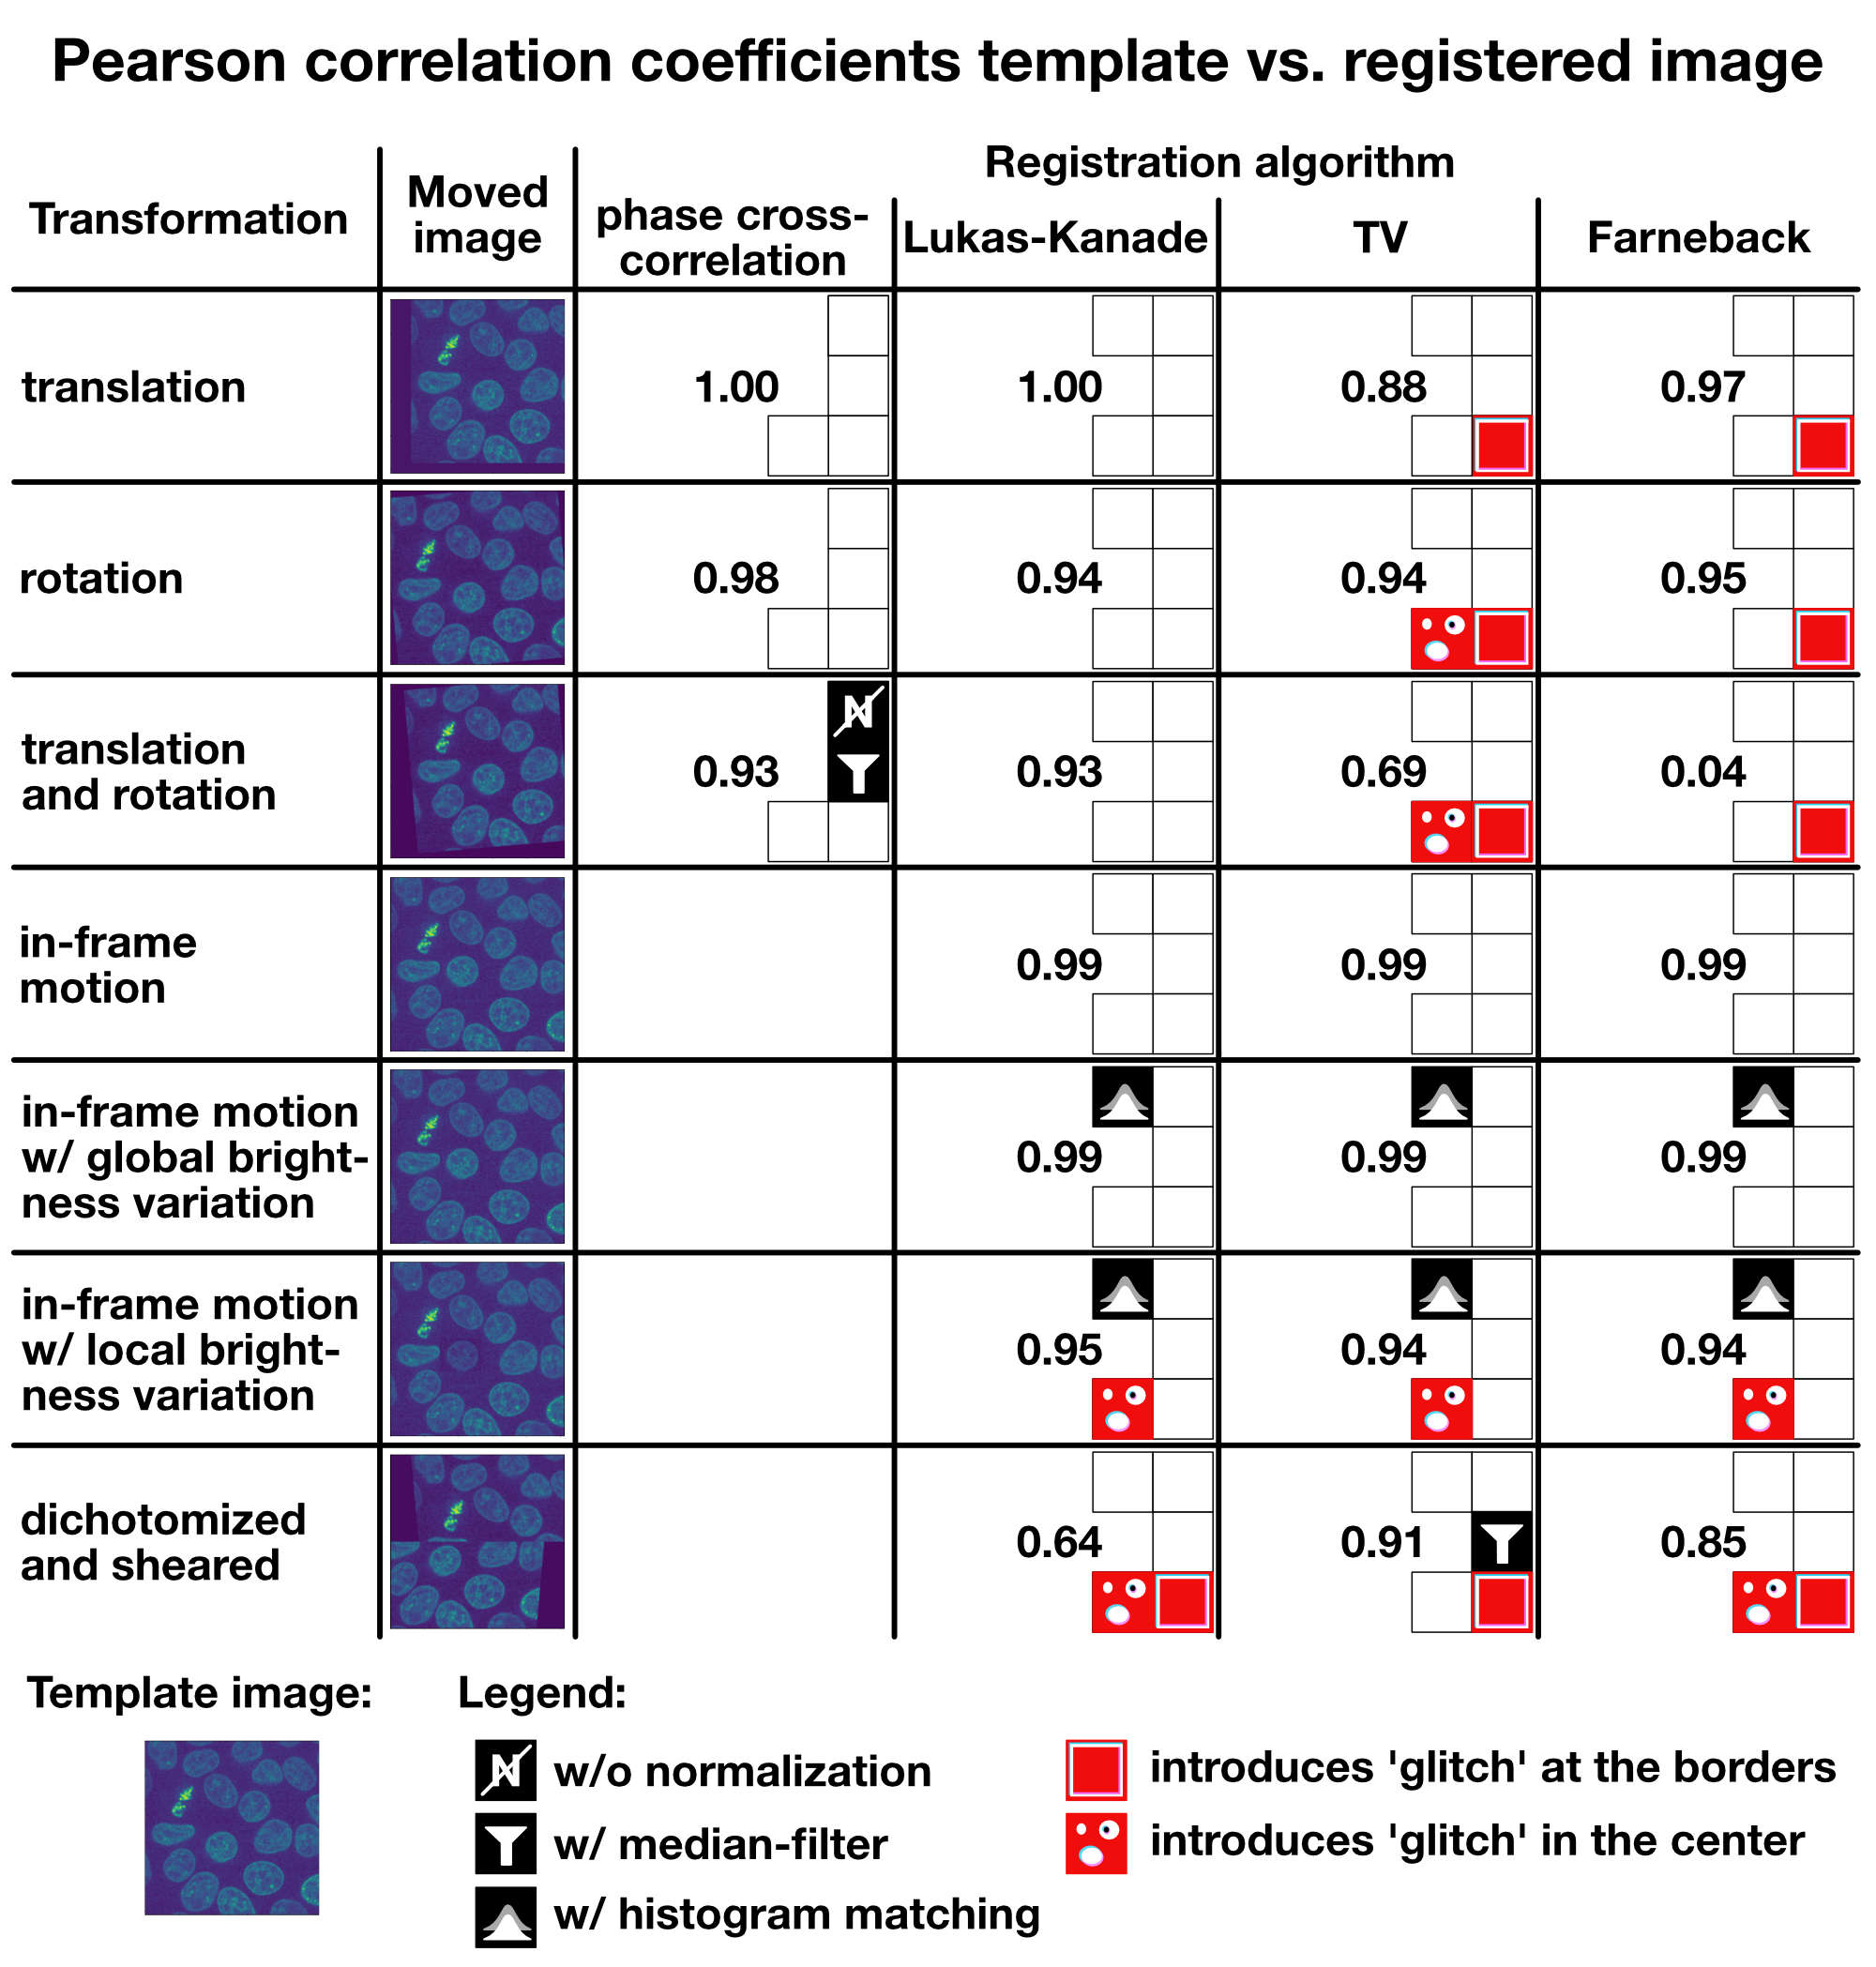 Summary of our results: Pearson correlation coefficients for the template image vs. the registered image for each tested transformation and algorithm.